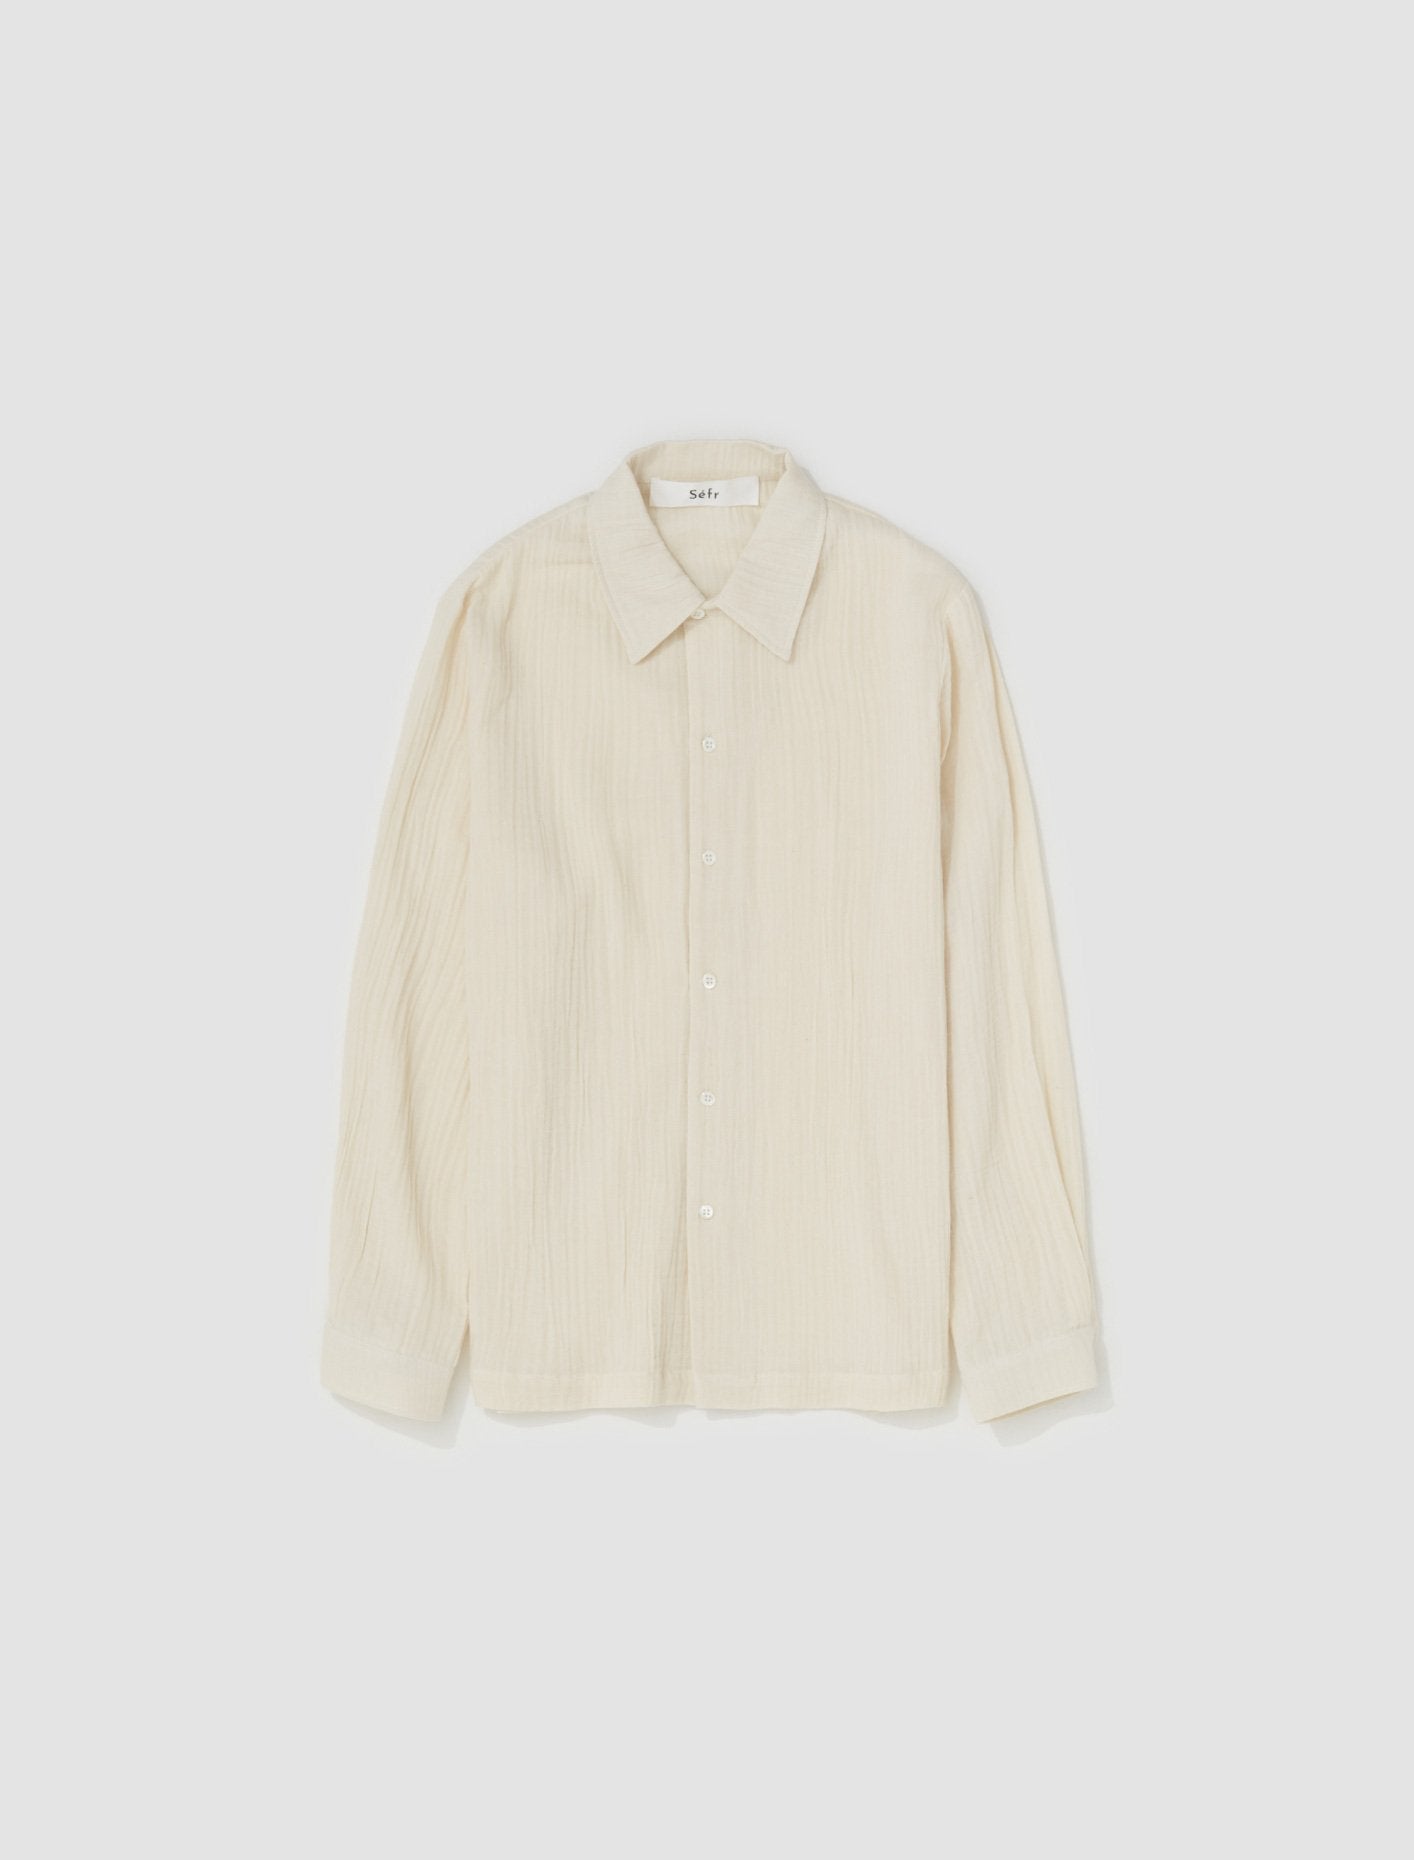 Ripley Shirt in Pleated White Cloth